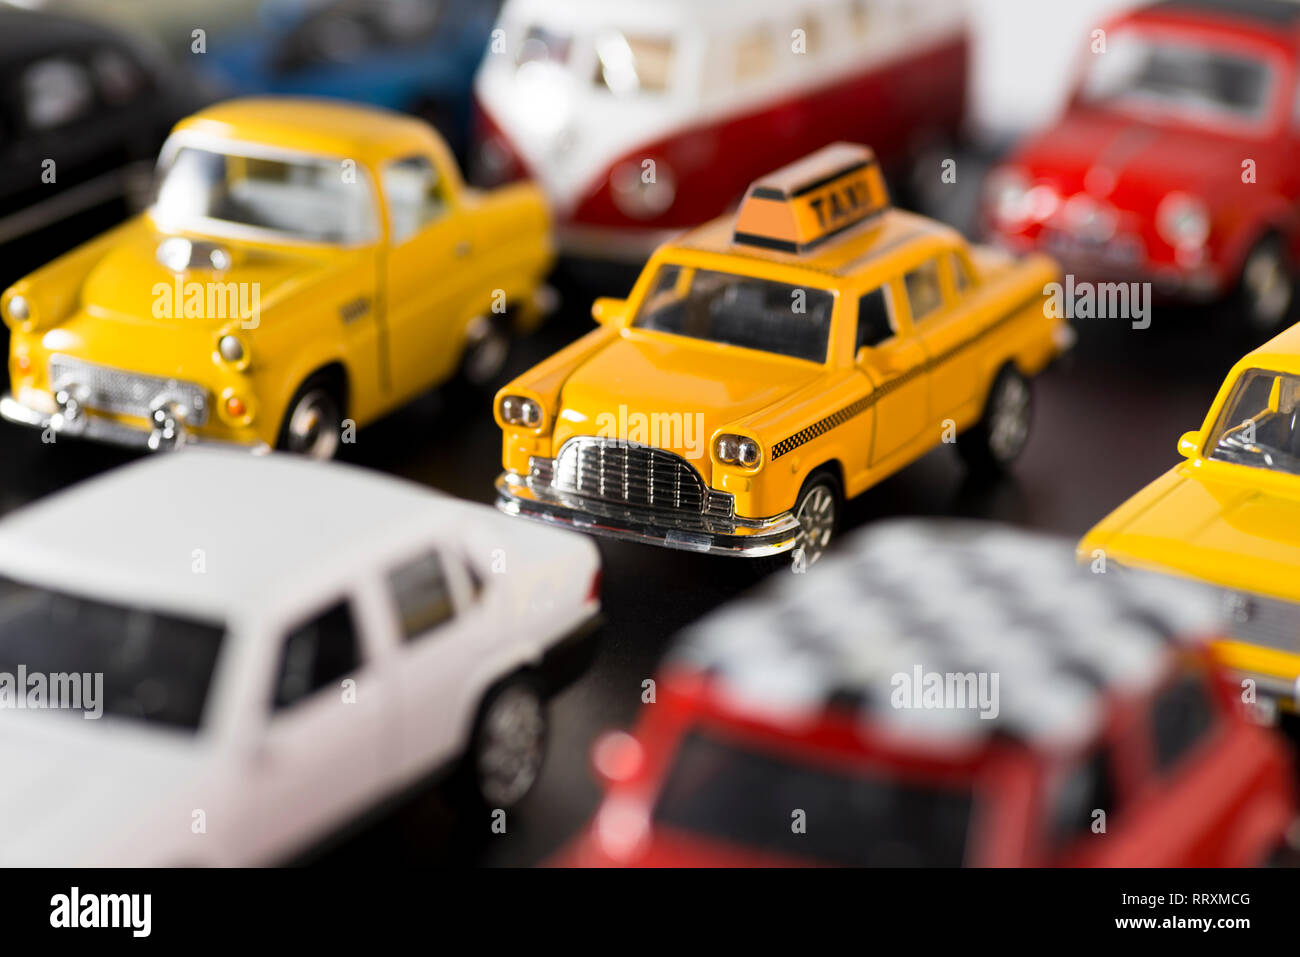 Izmir, Turkey - April  18, 2018: Various some brand toy cars on a black ground, looks like a traffic jam on the road. There is a taxi car on the cente Stock Photo